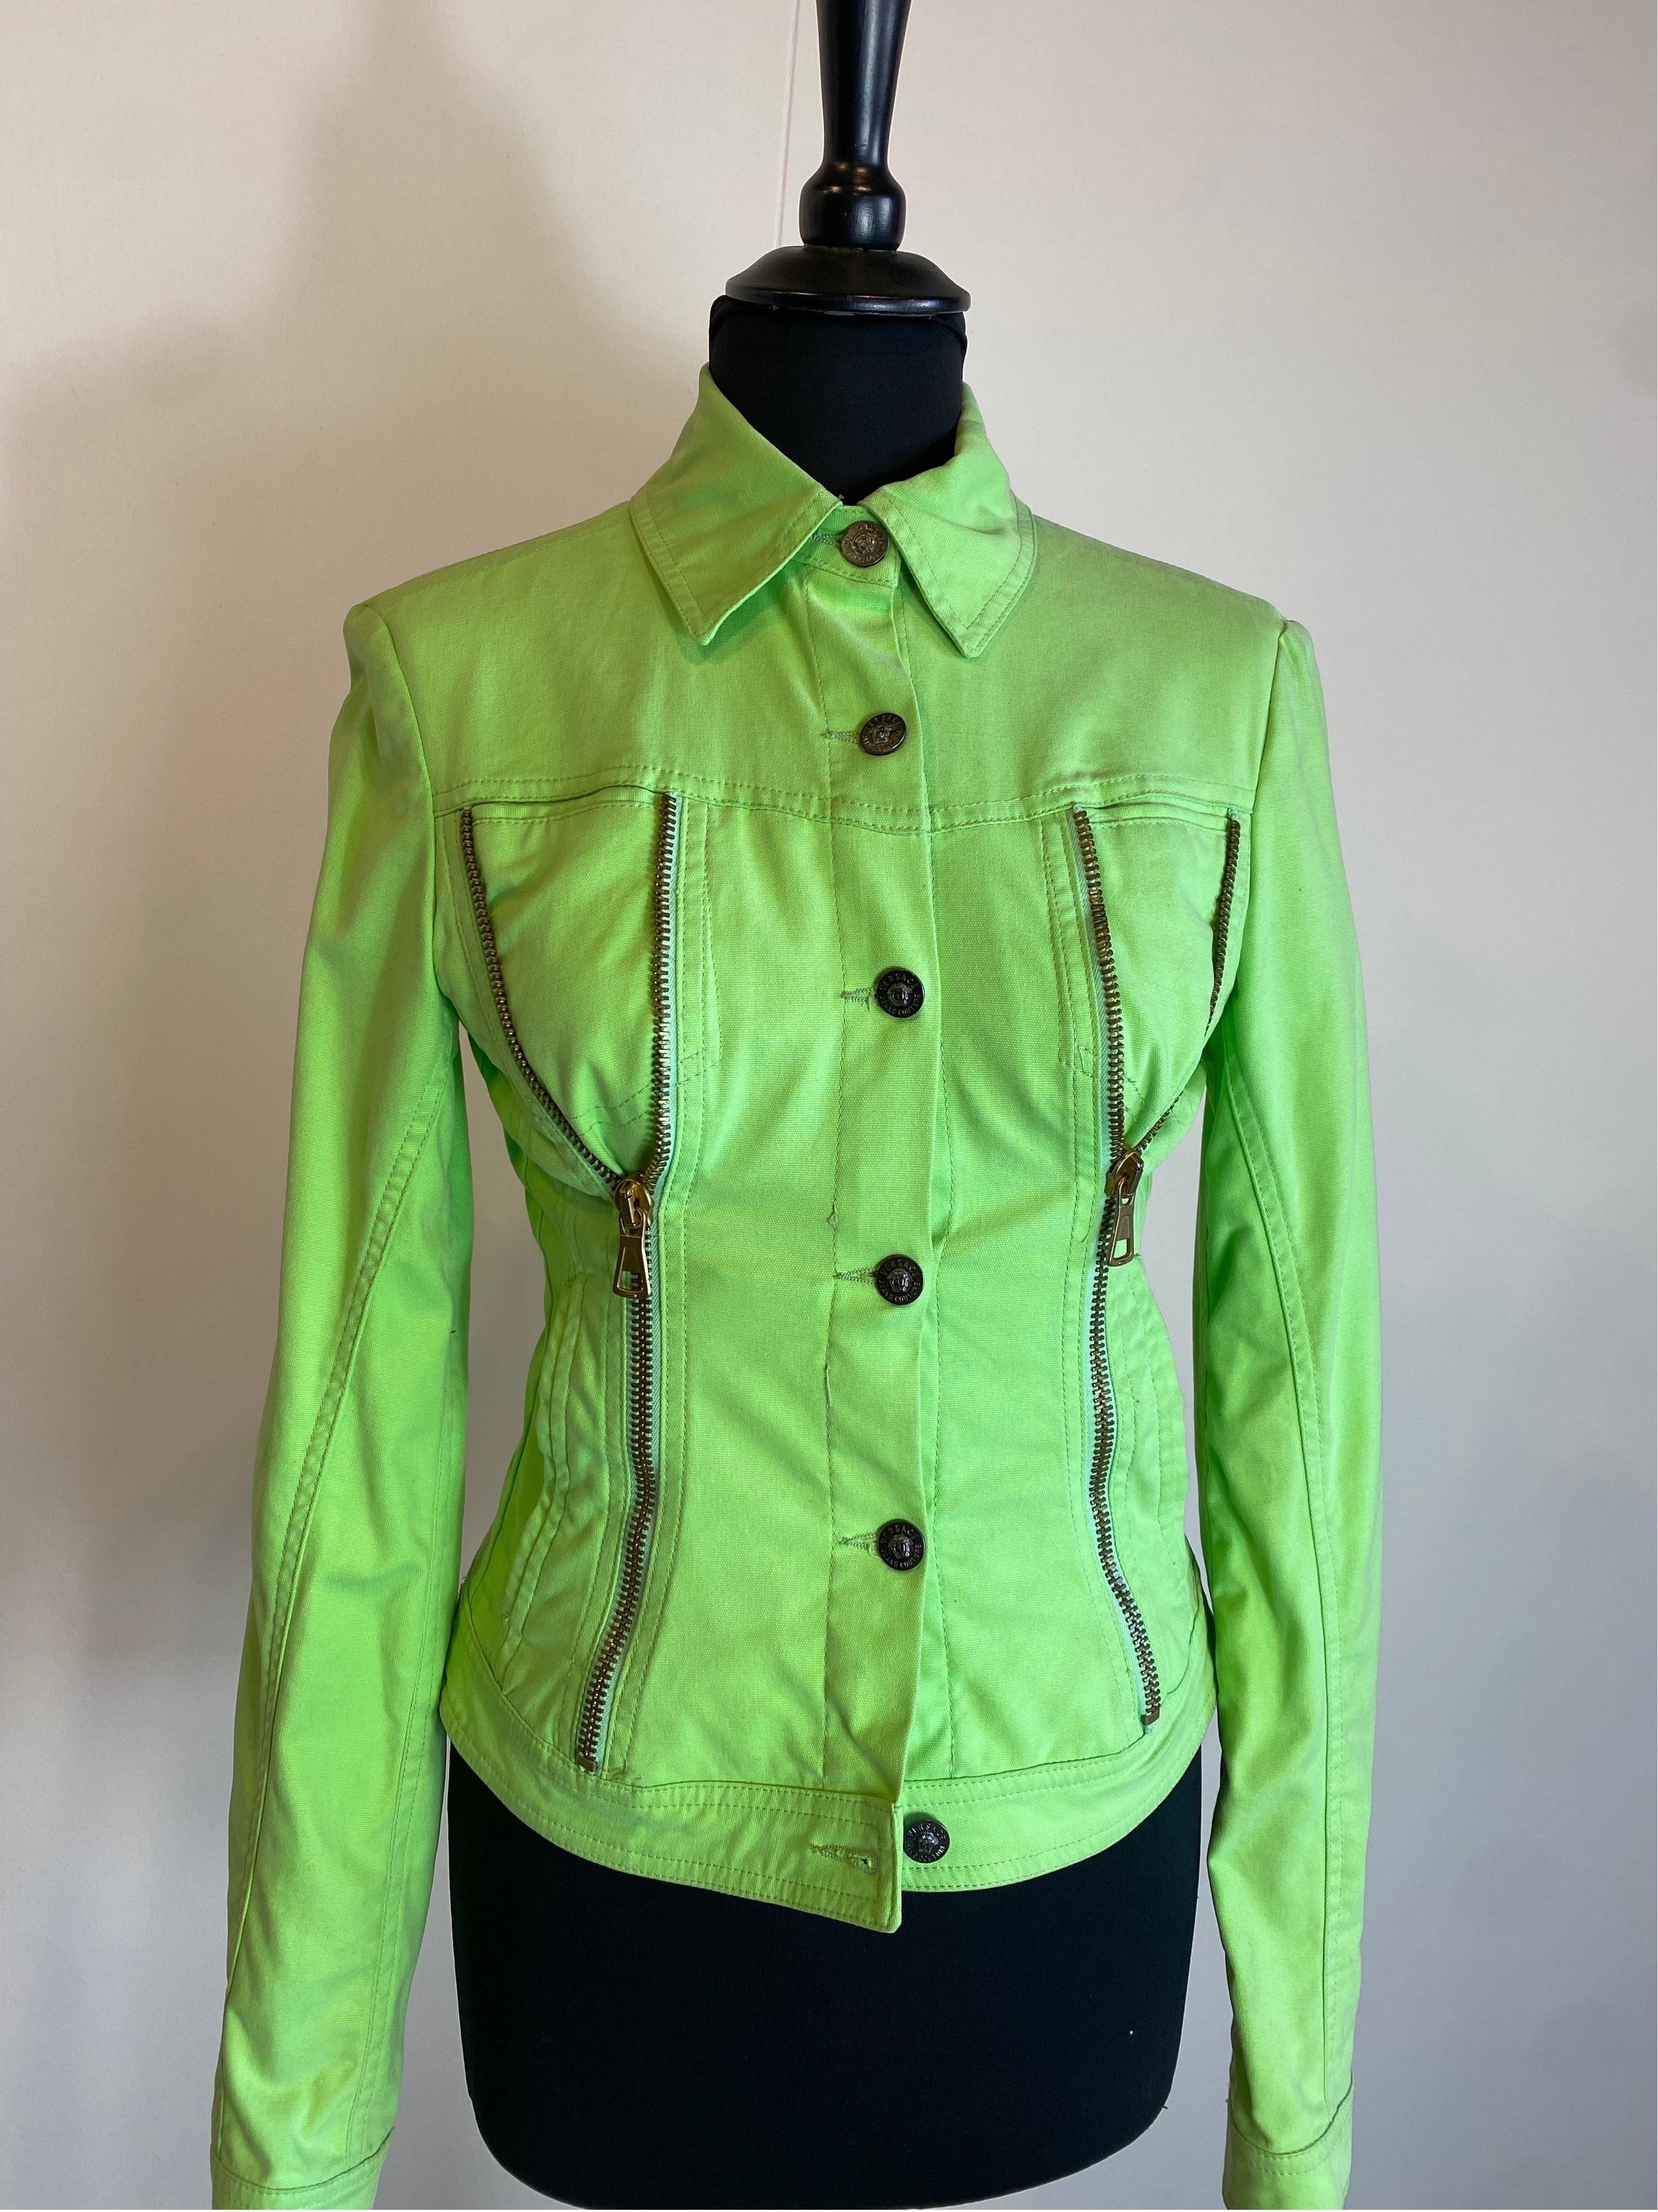 Versace Jeans Couture jacket.
Composition label missing but we think it is lime green cotton.
Size XS.
Shoulders 40 cm
Bust 40 cm
Length 59 cm
Sleeve 66 cm
Good general condition, shows signs of normal use.